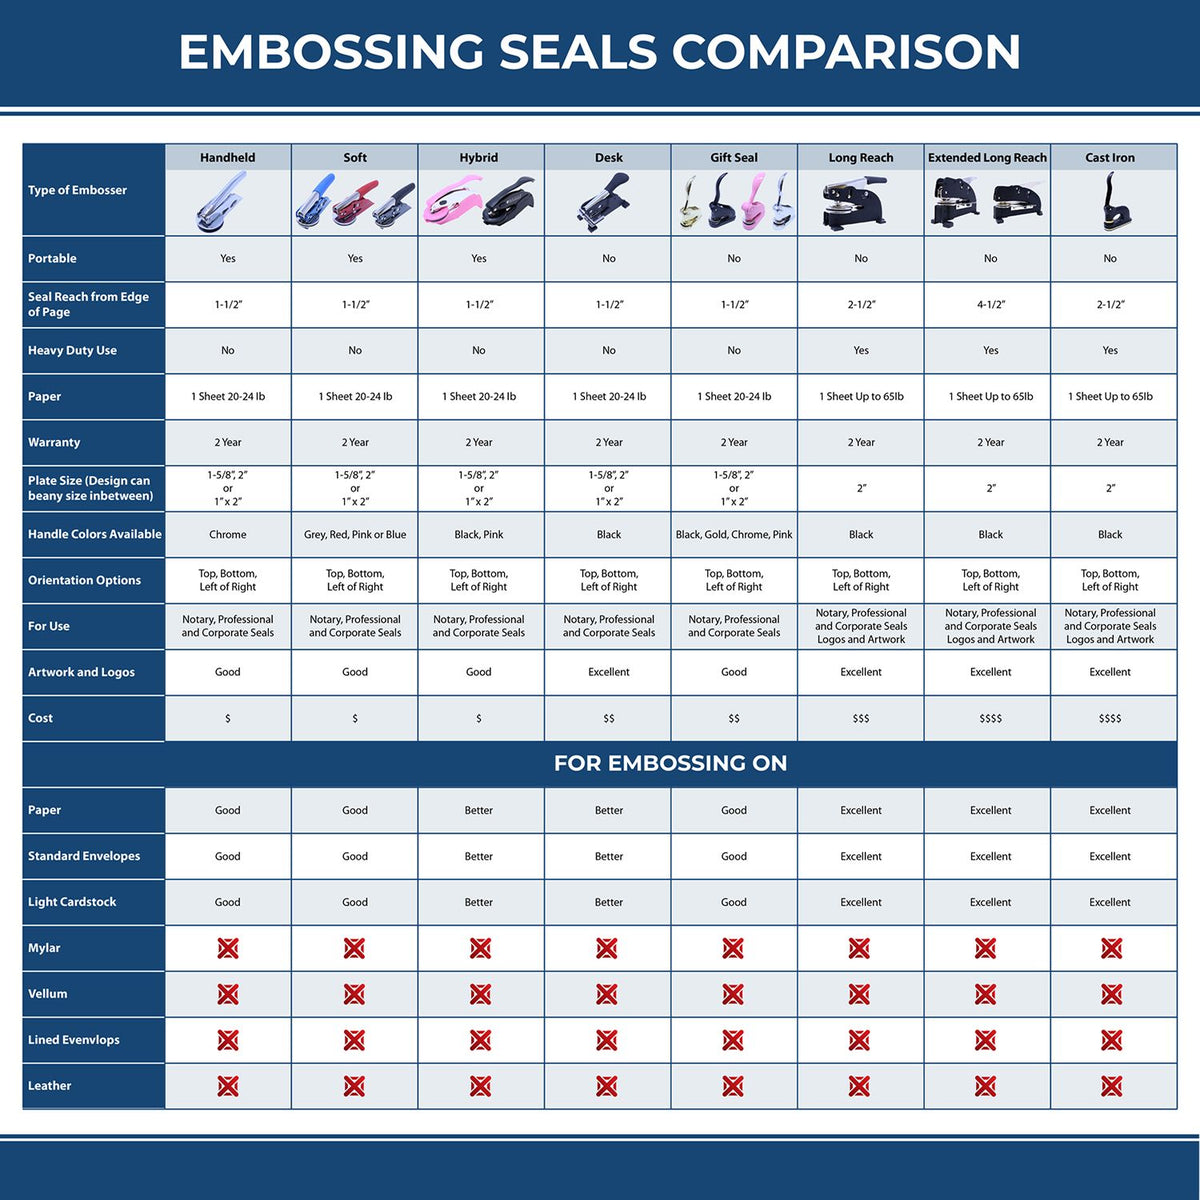 A comparison chart for the different types of mount models available for the State of Maryland Extended Long Reach Geologist Seal